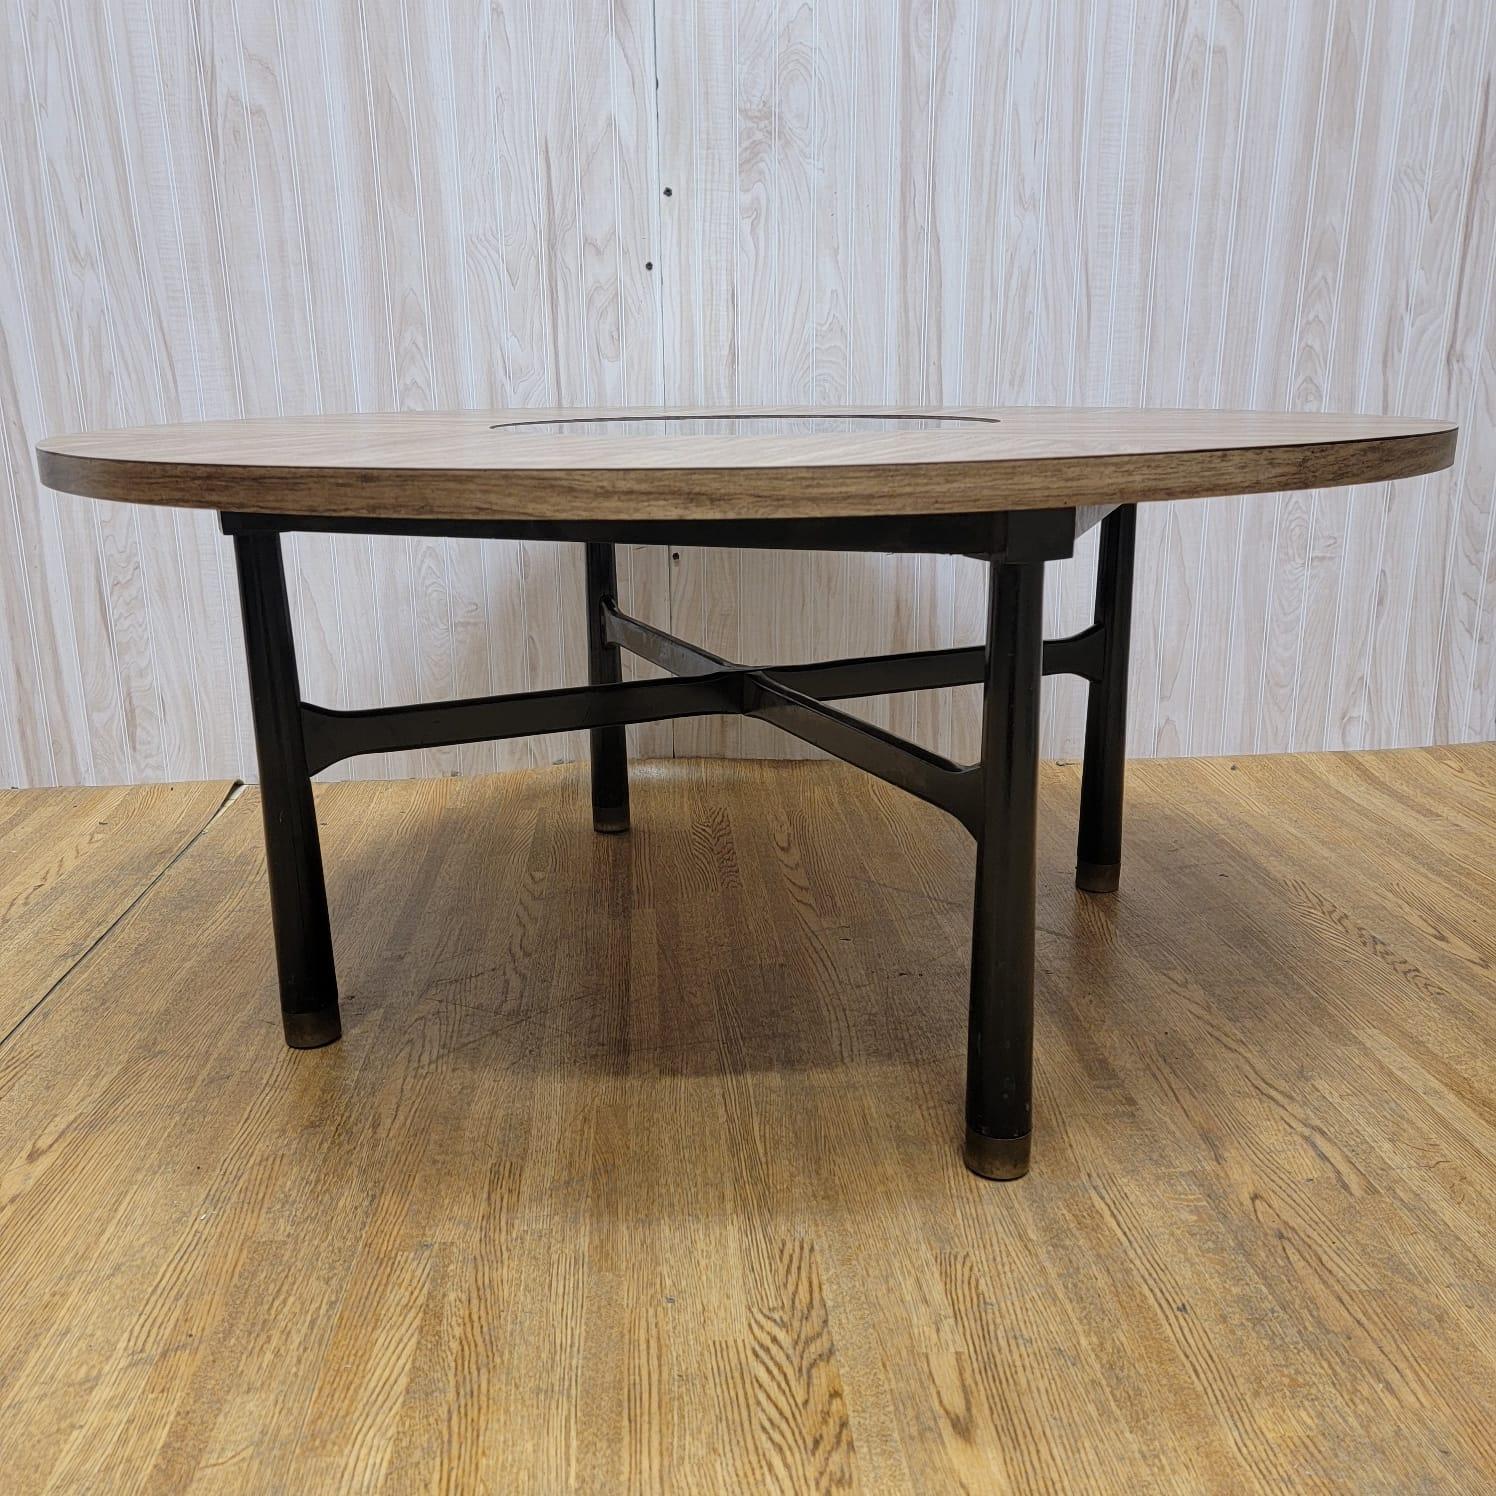 Mid-Century Modern Harvey Probber walnut with black marble cocktail table

A Mid-Century Modern table designed by Harvey Probber which could be used as a coffee table or gaming table. 

circa 1950

Measures: W 50